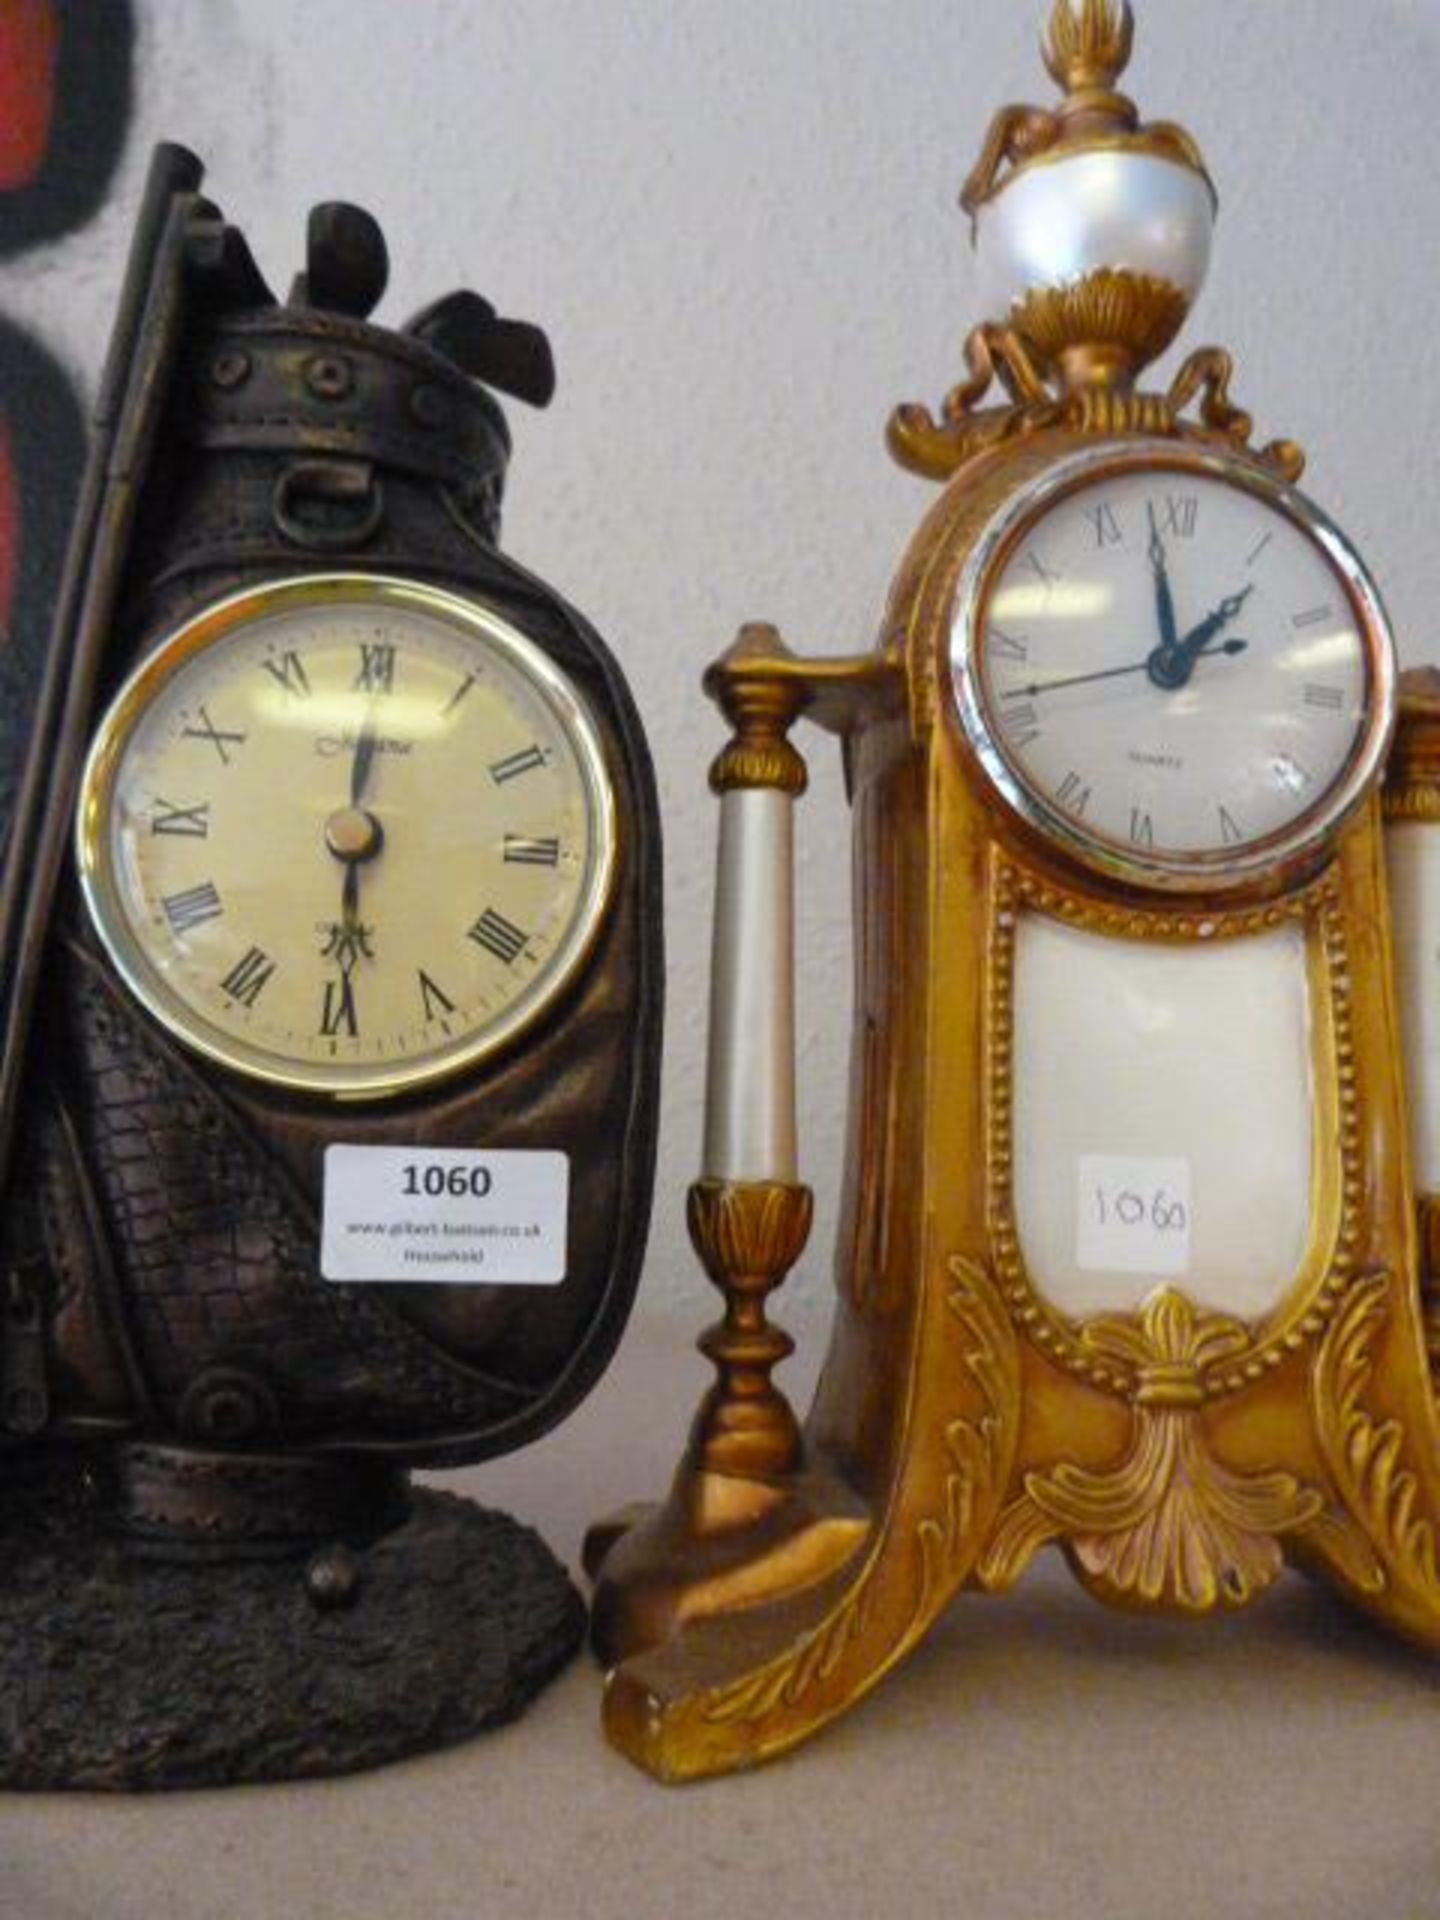 Novelty Golf Bag Clock and an Antique Effect Battery Operated Mantel Clock